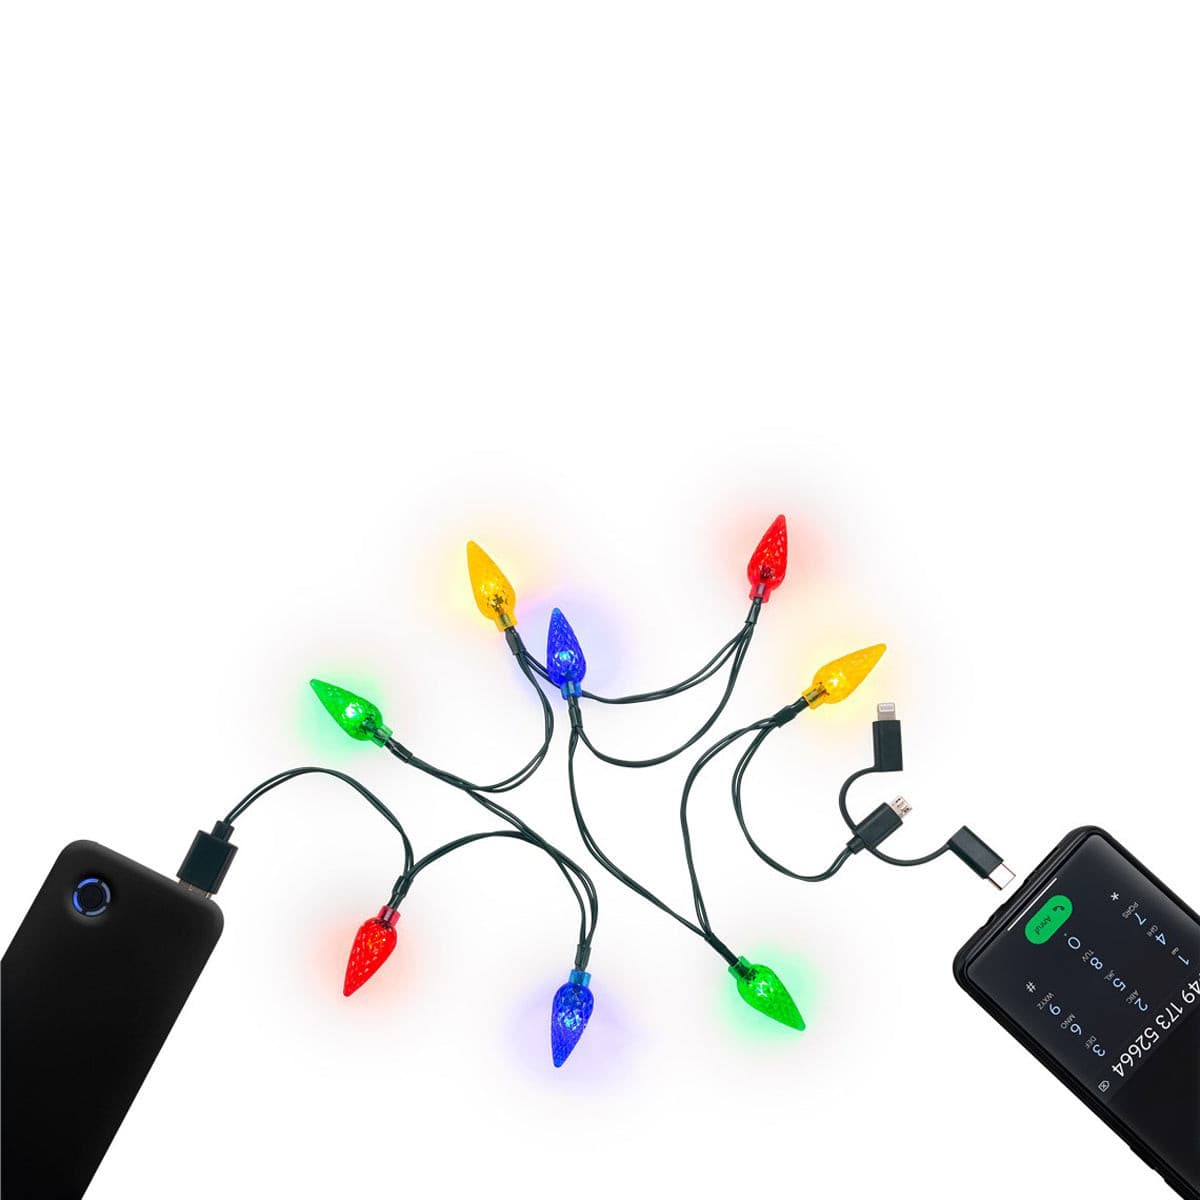 Goobay Smartphone USB-A Charging Cable with LED Lights for Smartphones.